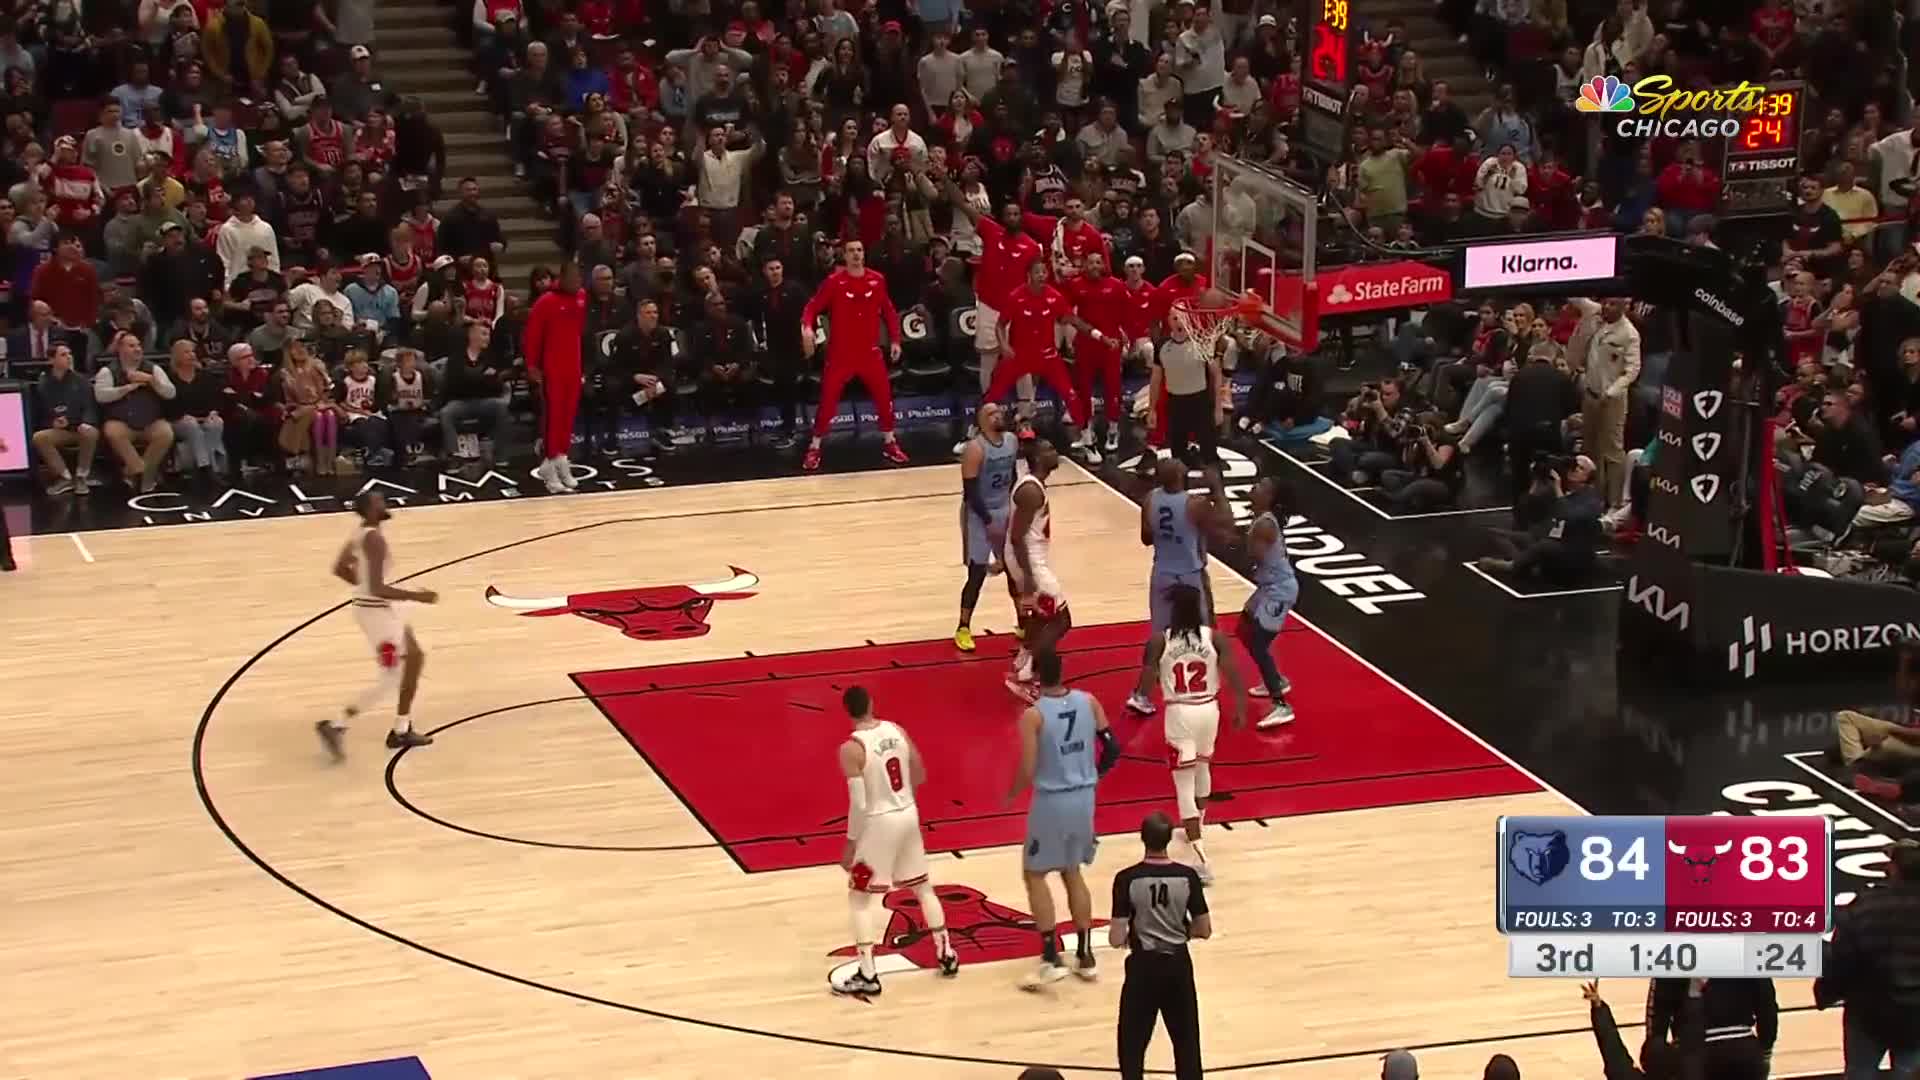 Highlight Patrick Williams gives the Bulls their first lead of the game